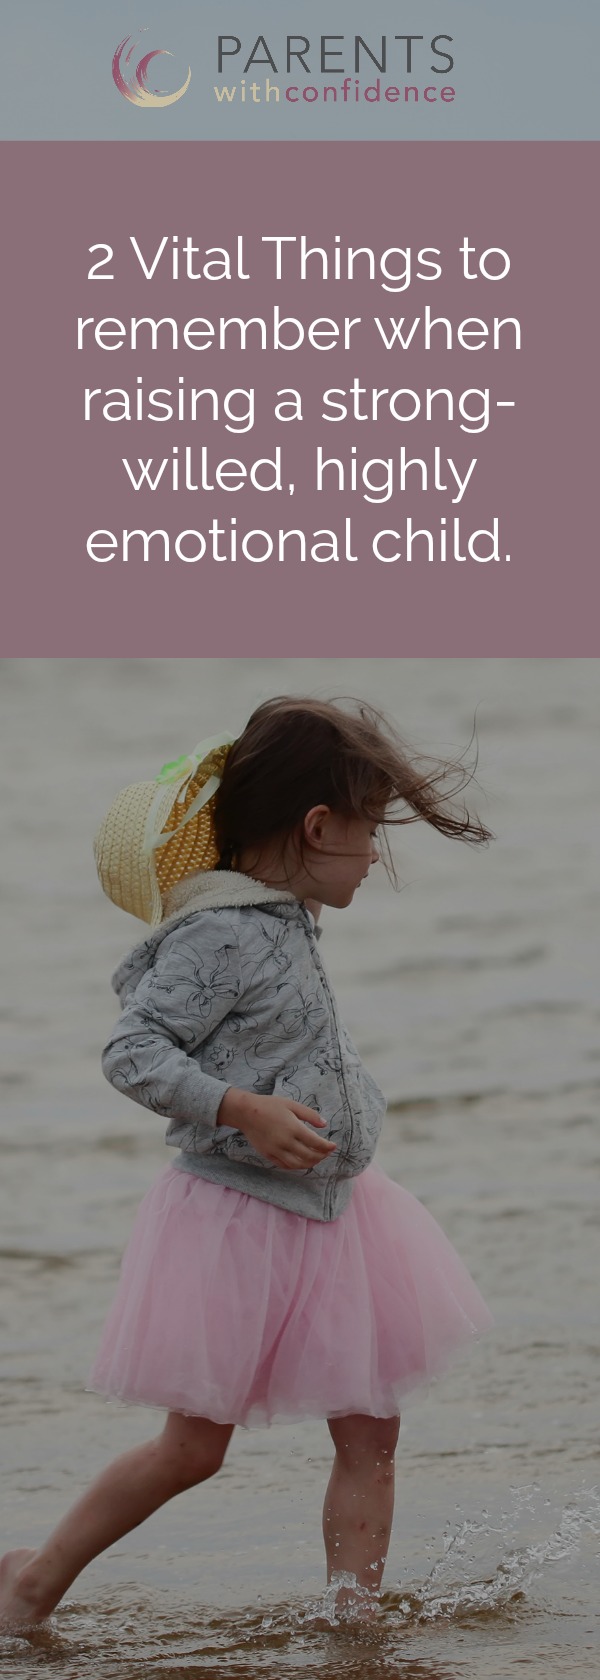 The Best Parent Mindset for Raising a Strong-Willed Child. Feel exhausting trying to be a good parent to your emotionally intense, strong-willed, difficult child? Looking at your child with a different mindset can change their life.